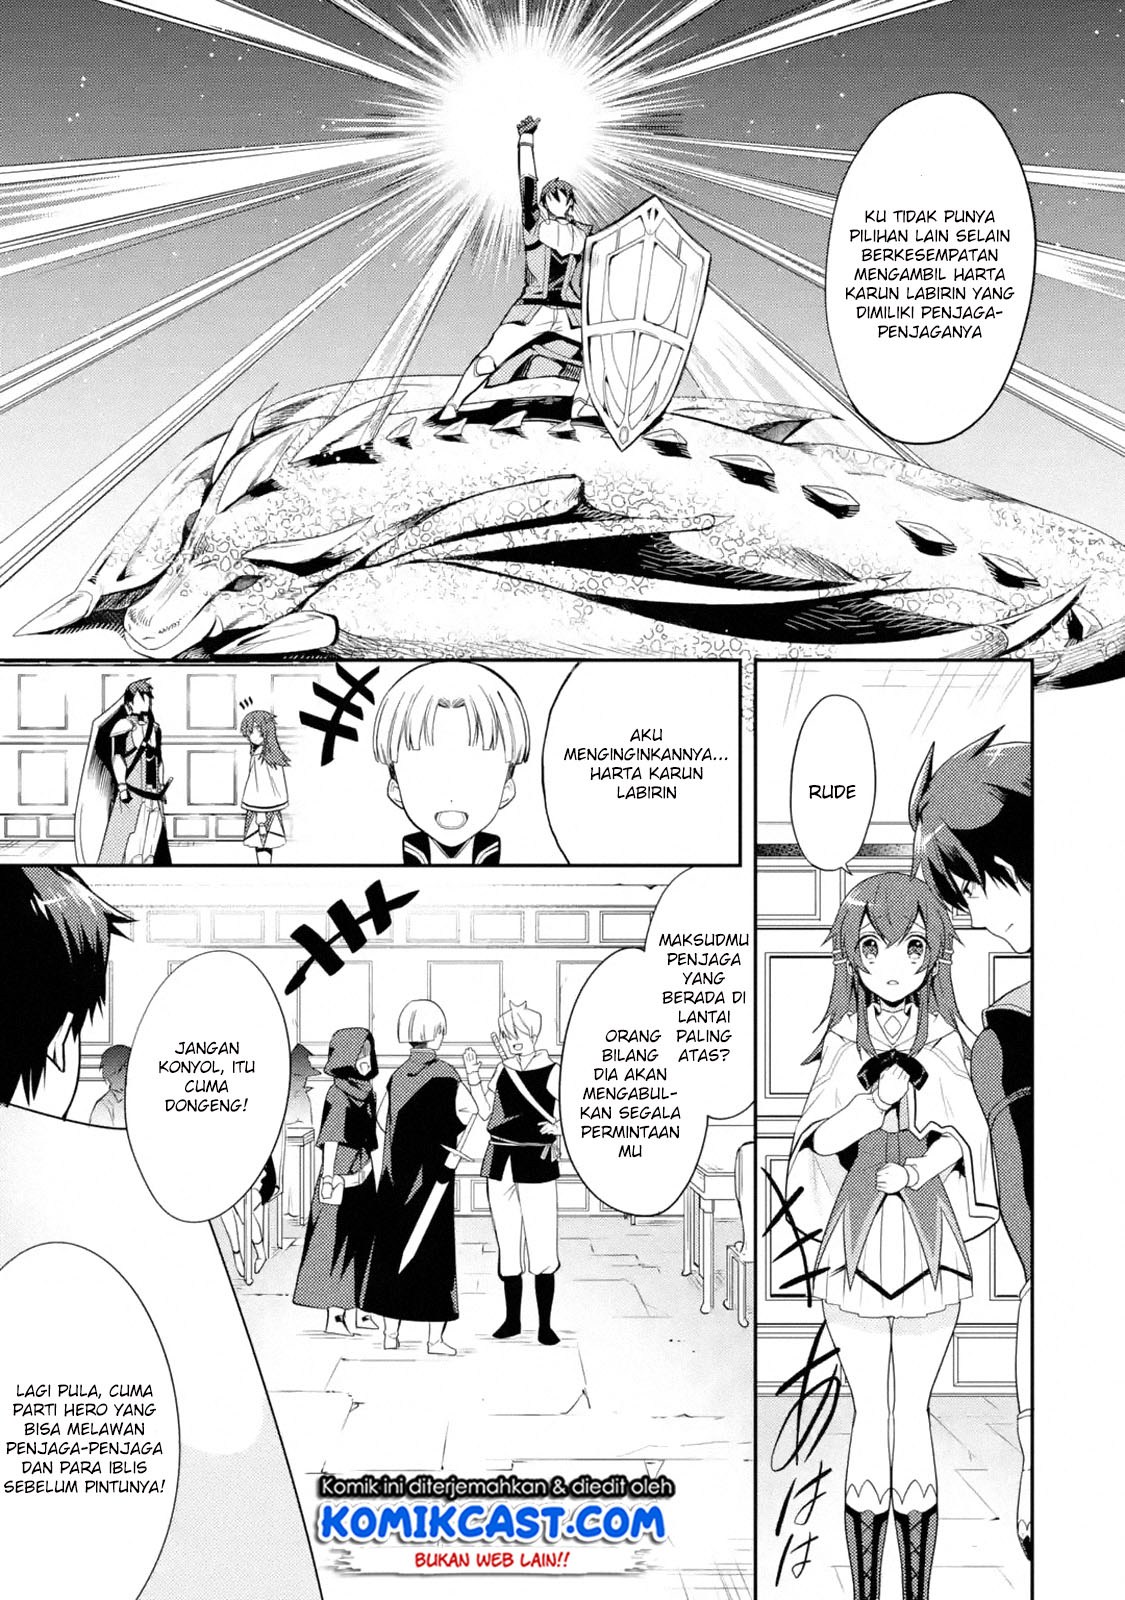 Spoiler Manga The Labyrinth Raids of the Ultimate Tank ~The Tank Possessing a Rare 9,999 Endurance Skill was Expelled from the Hero Party~ 1